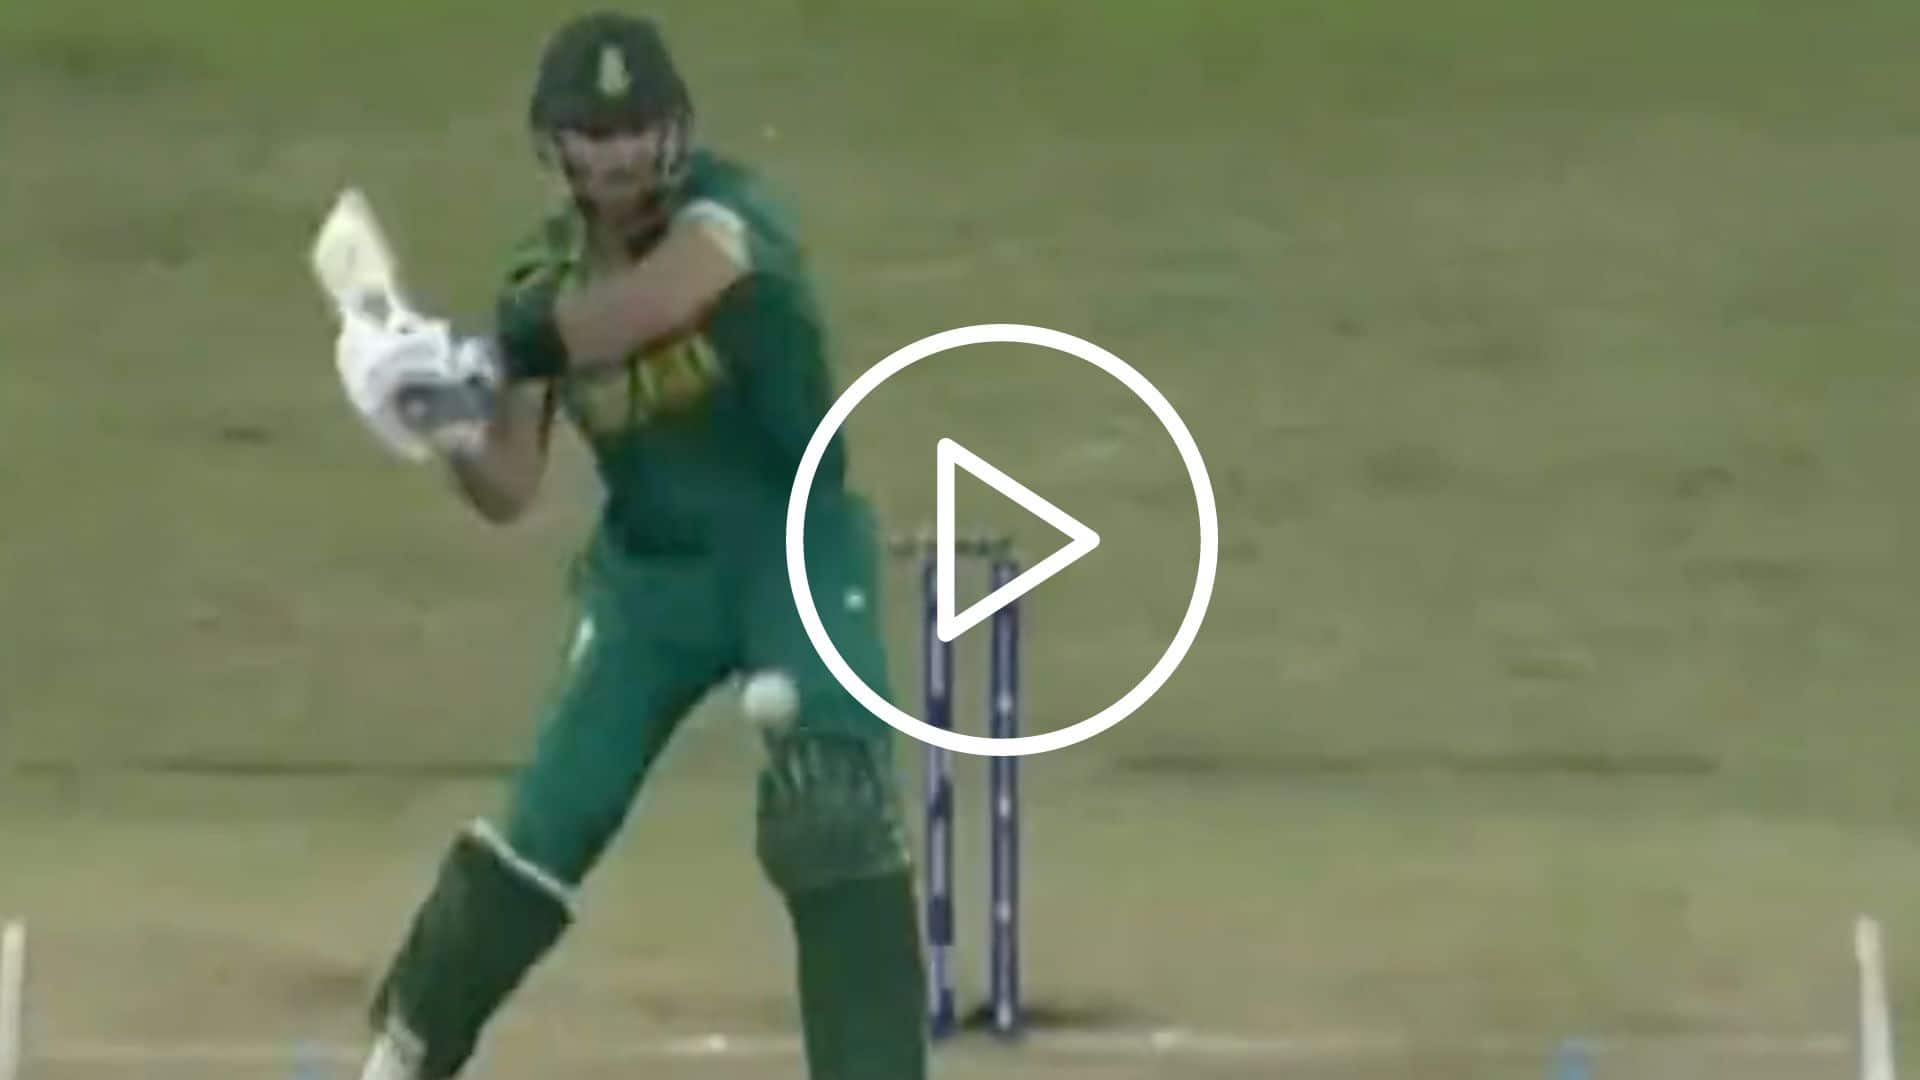 [Watch] Aiden Markram Hits Stylish Pull Shot To End SA's Innings In Style vs NZ